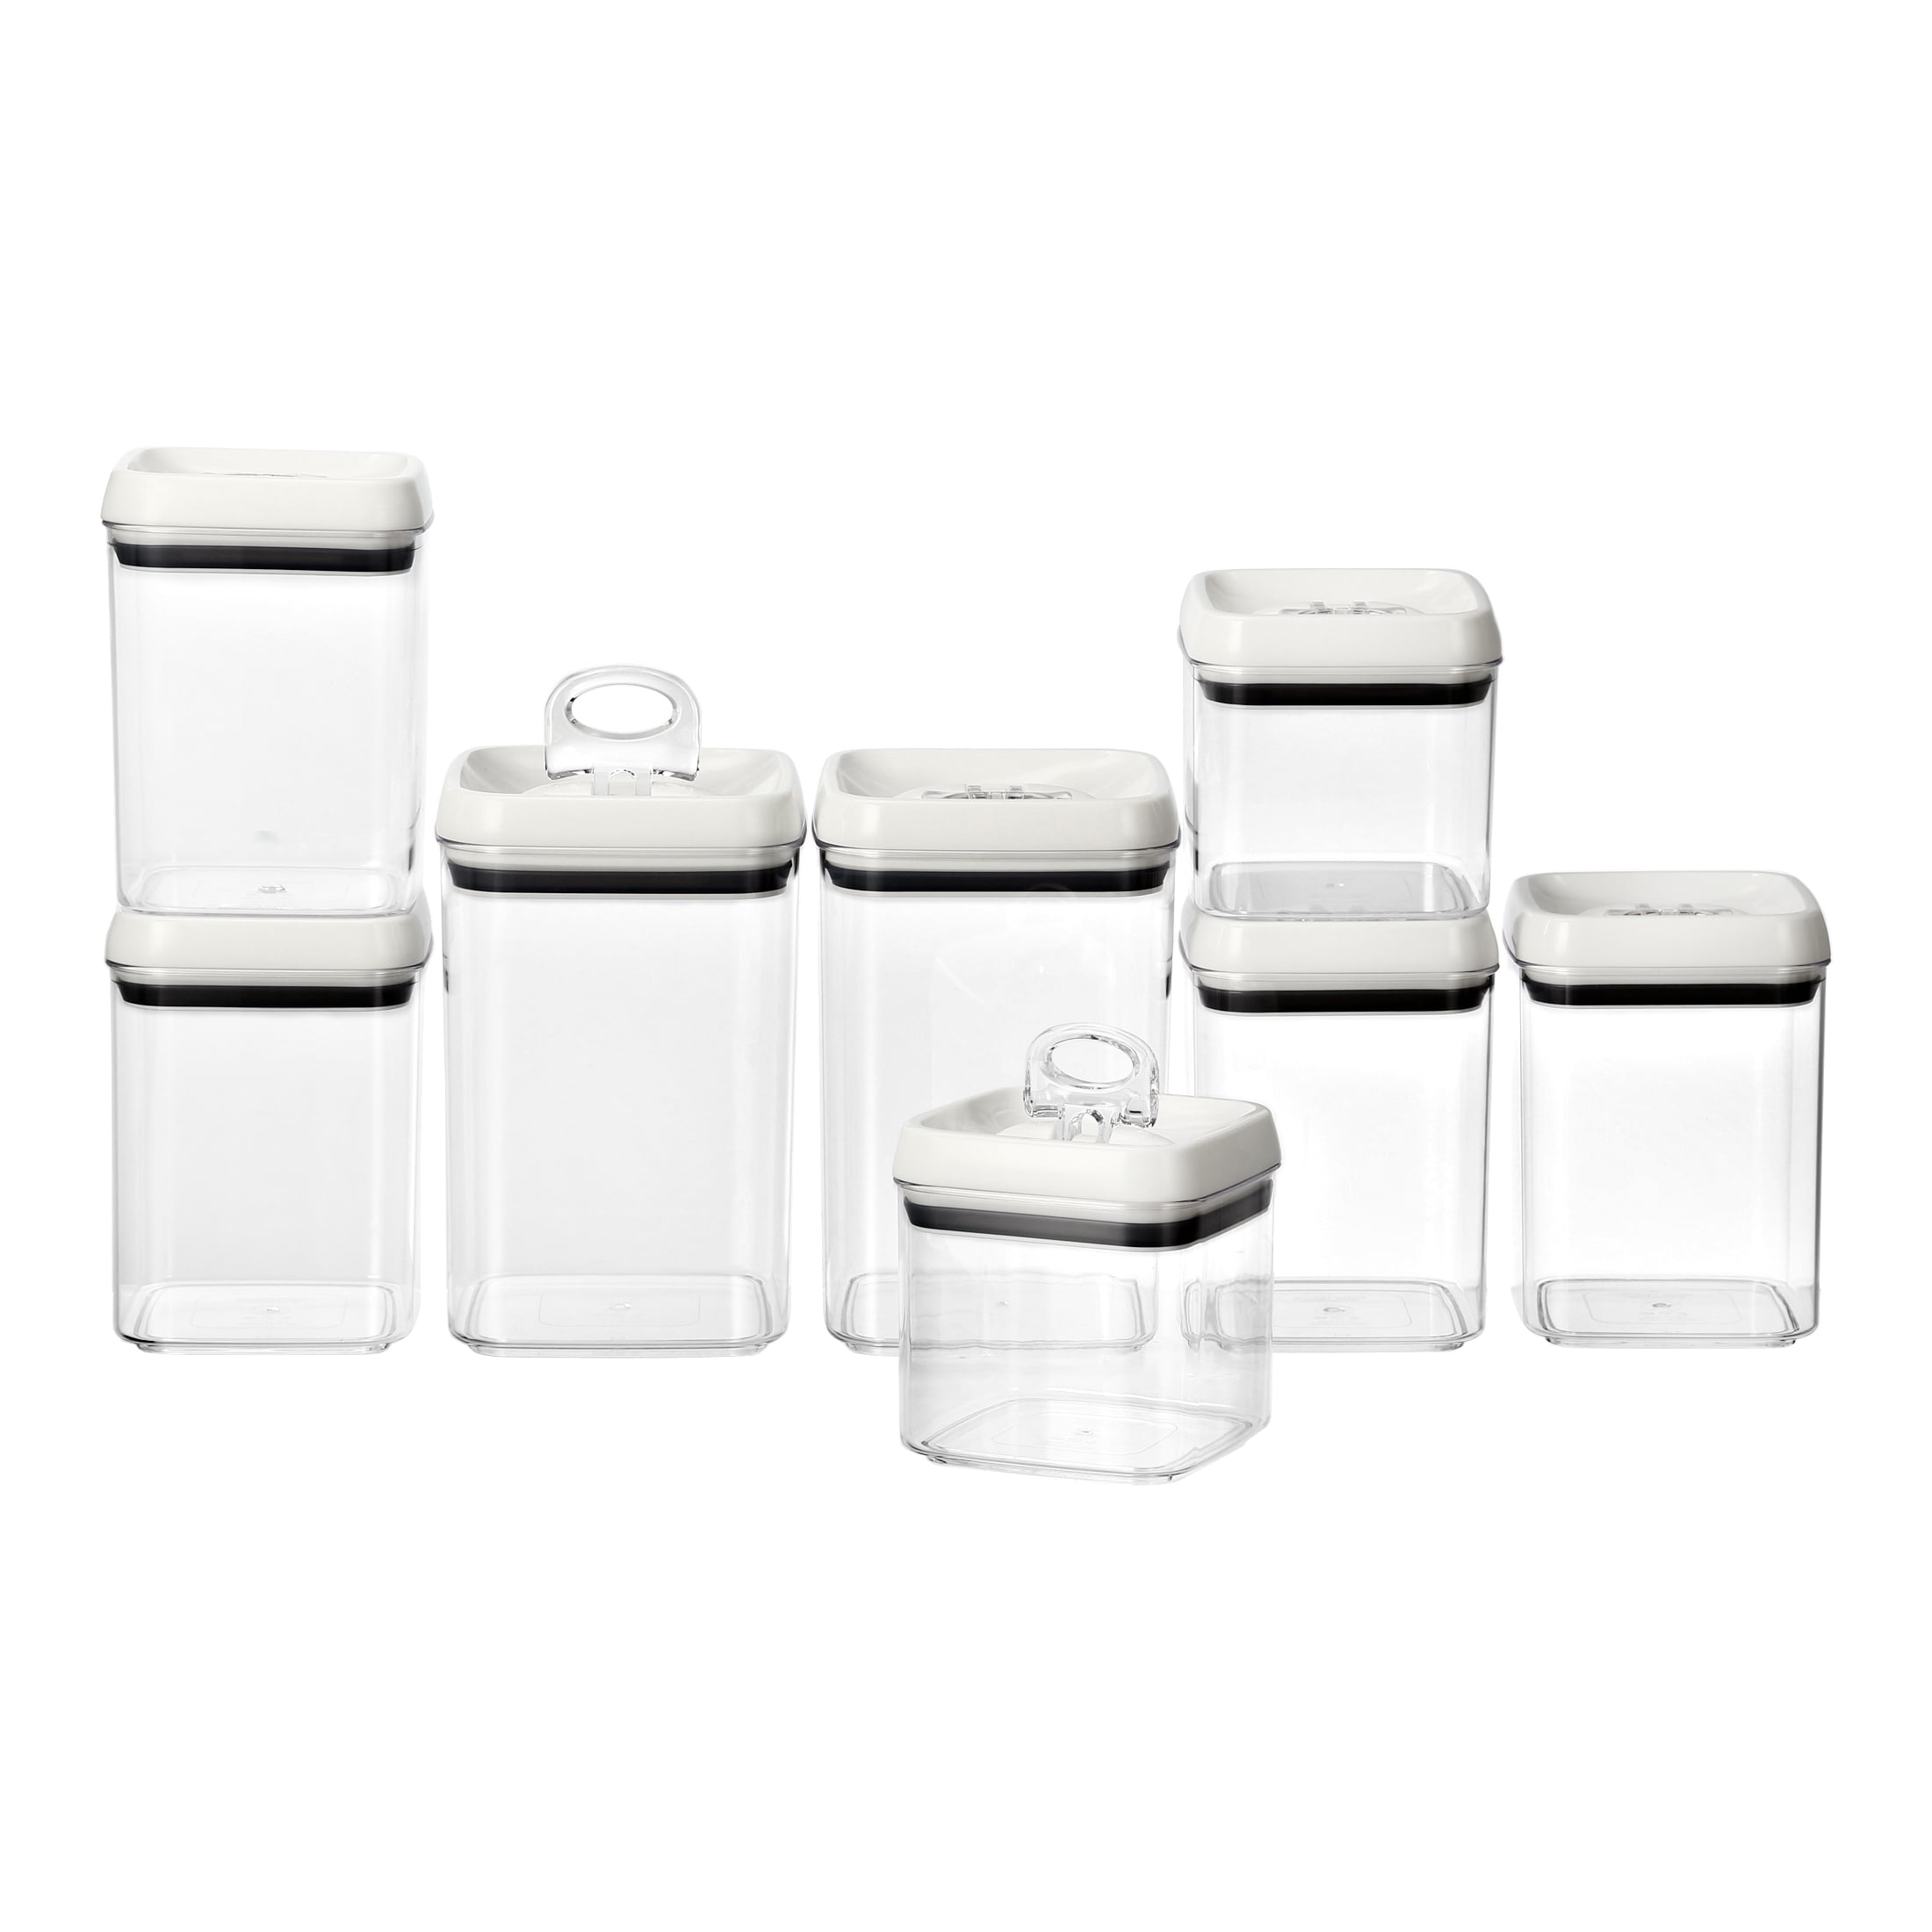 Better Homes & Gardens Canister Pack of 8 - Flip-Tite Food Storage Container Set